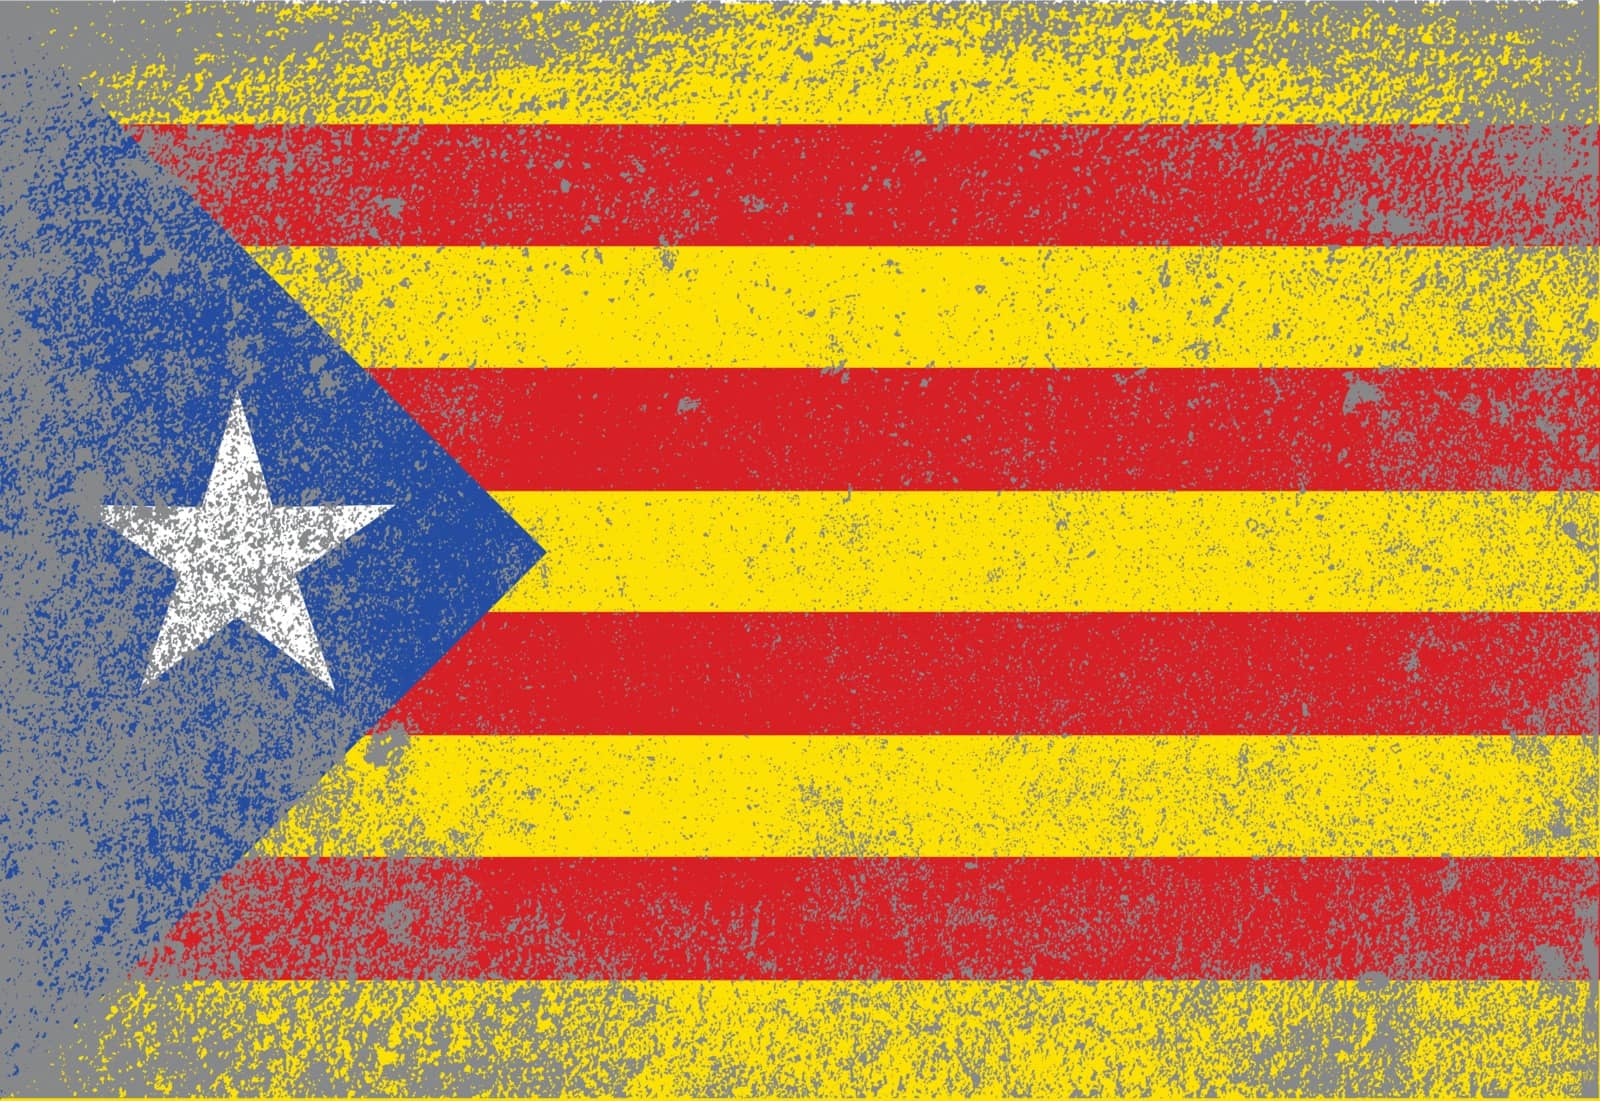 The flag as used by the Catalan portion of Spain with grunge